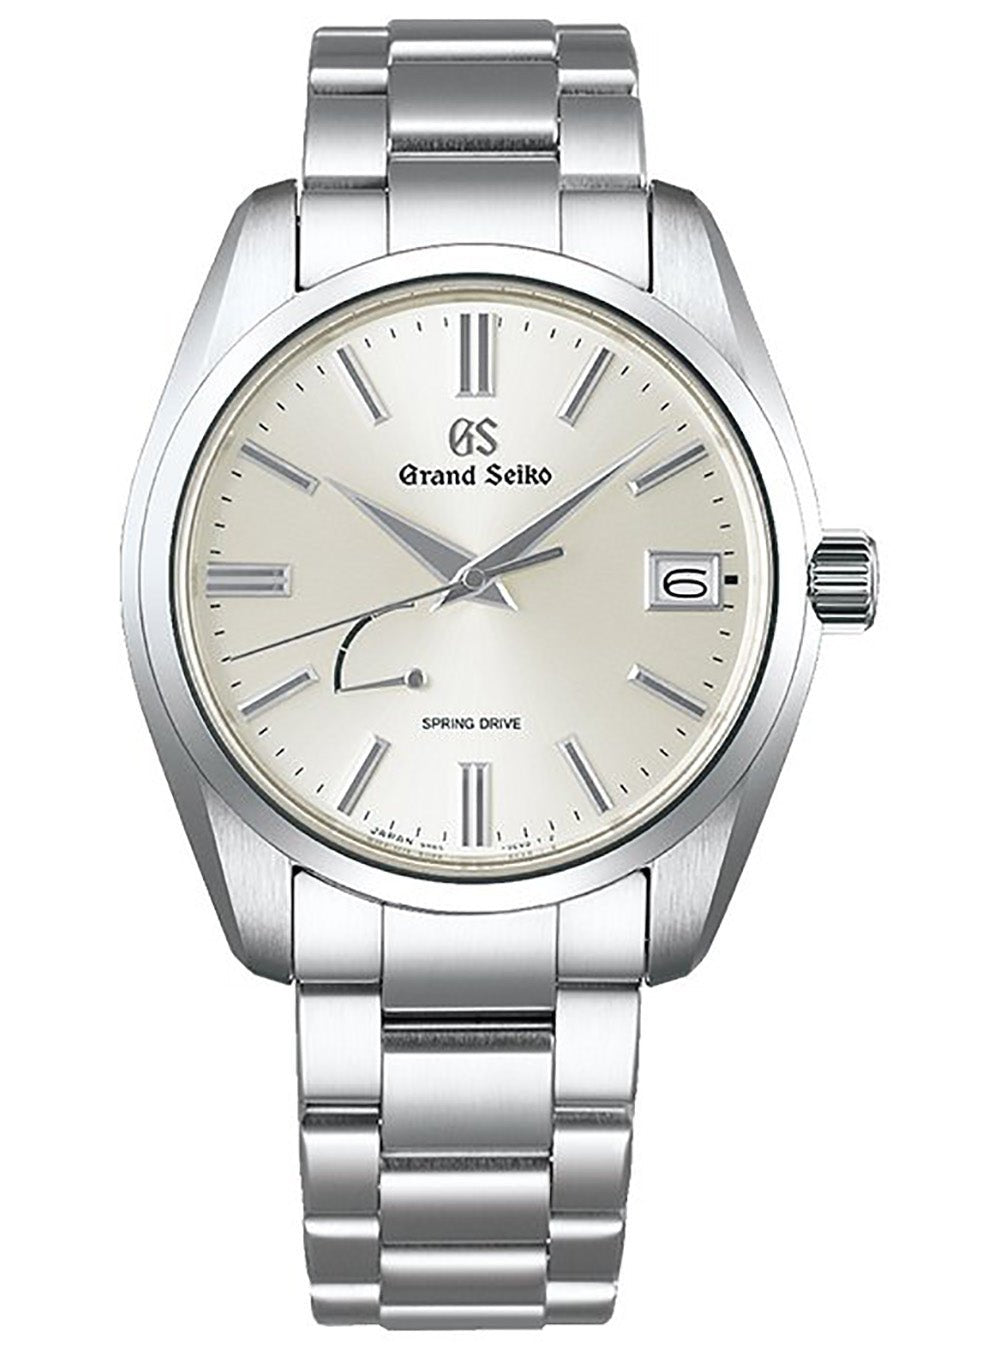 GRAND SEIKO HERITAGE COLLECTION TRADITIONAL 9R Spring Drive SBGA437 MADE IN JAPAN JDMWRISTWATCHjapan-select